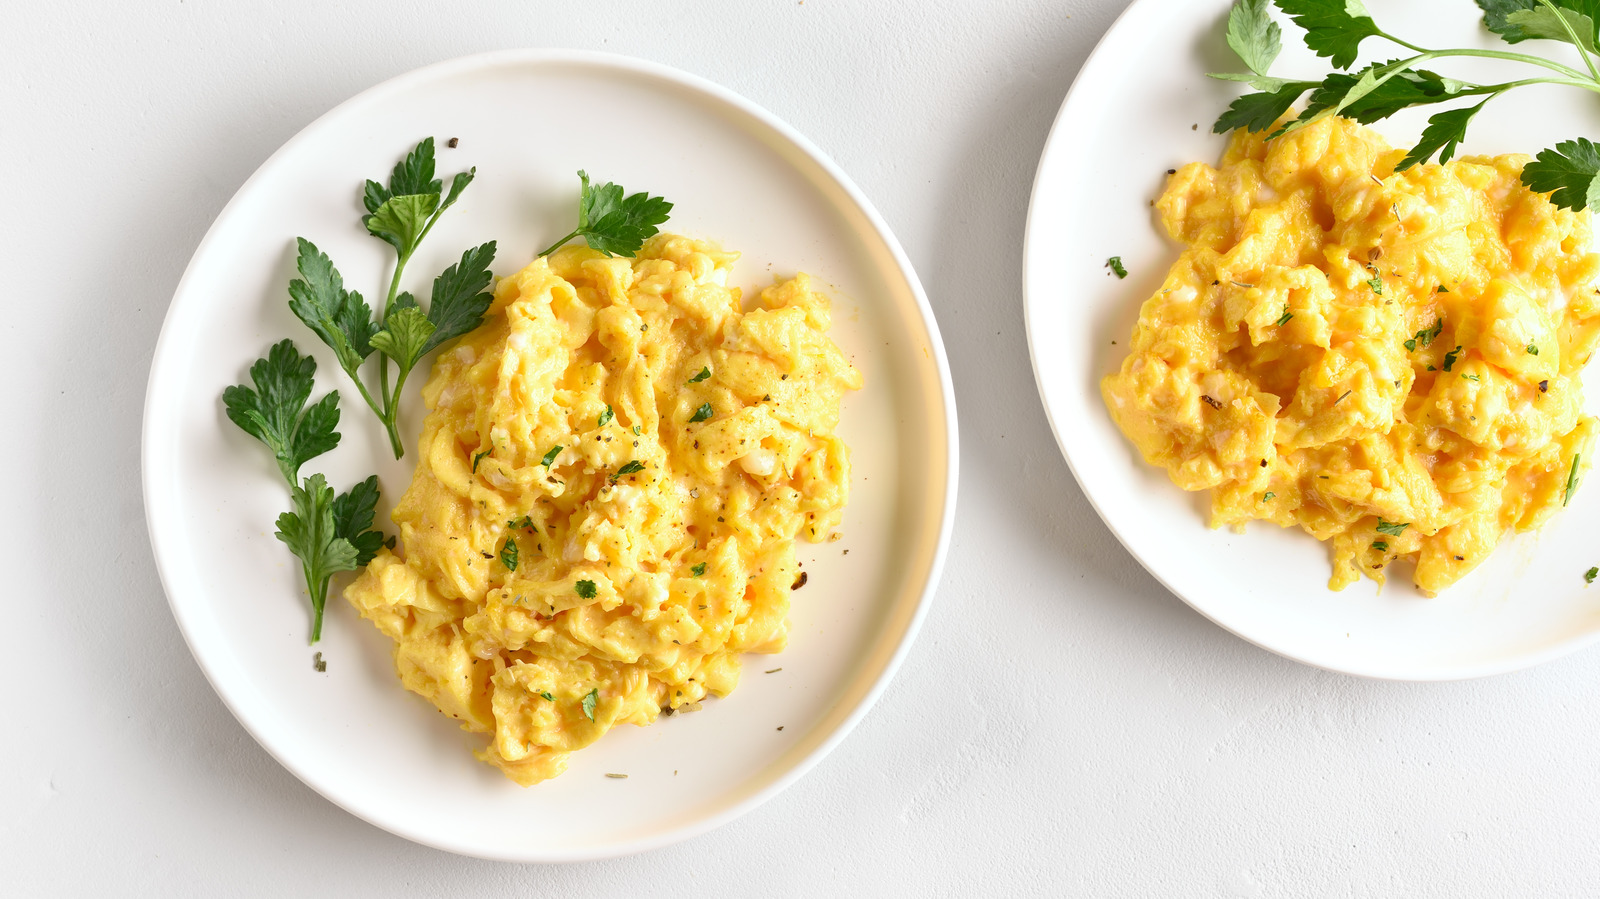 https://www.thedailymeal.com/img/gallery/stop-making-these-classic-scrambled-eggs-mistakes/l-intro-1673802242.jpg